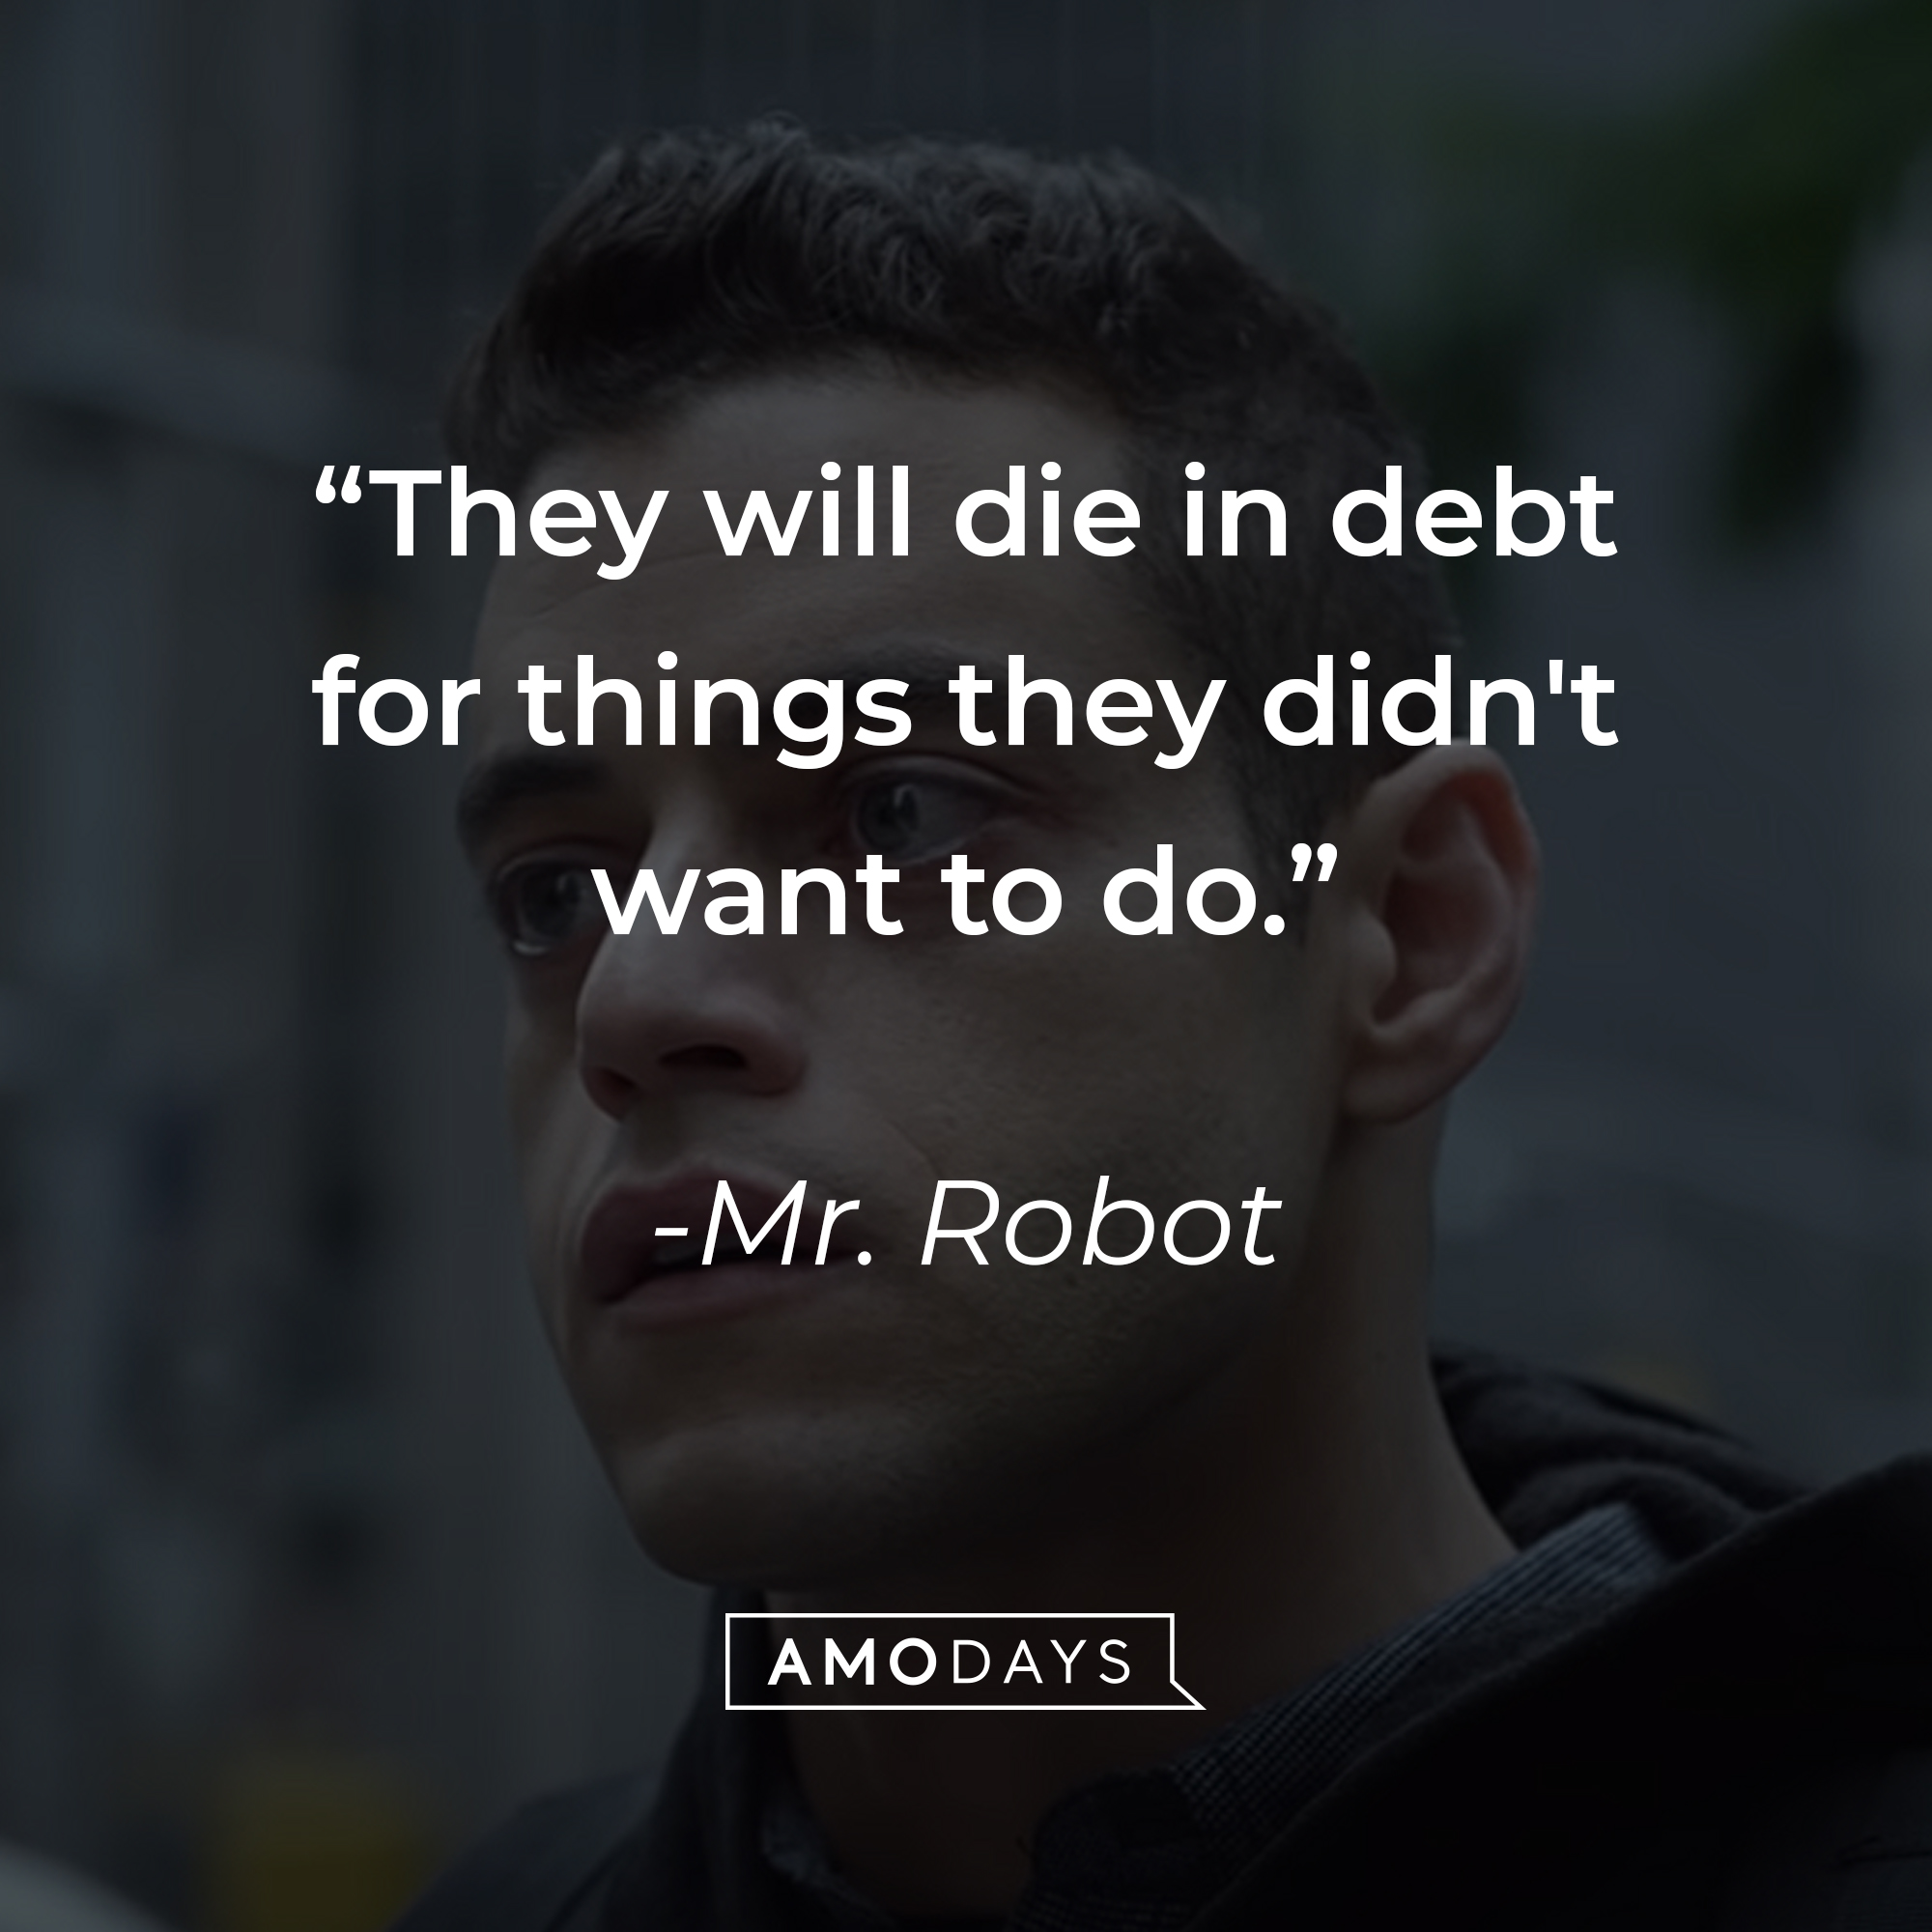 Mr. Robot's quote: "They will die in debt for things they didn't want to do." | Source: youtube.com/MrRobot